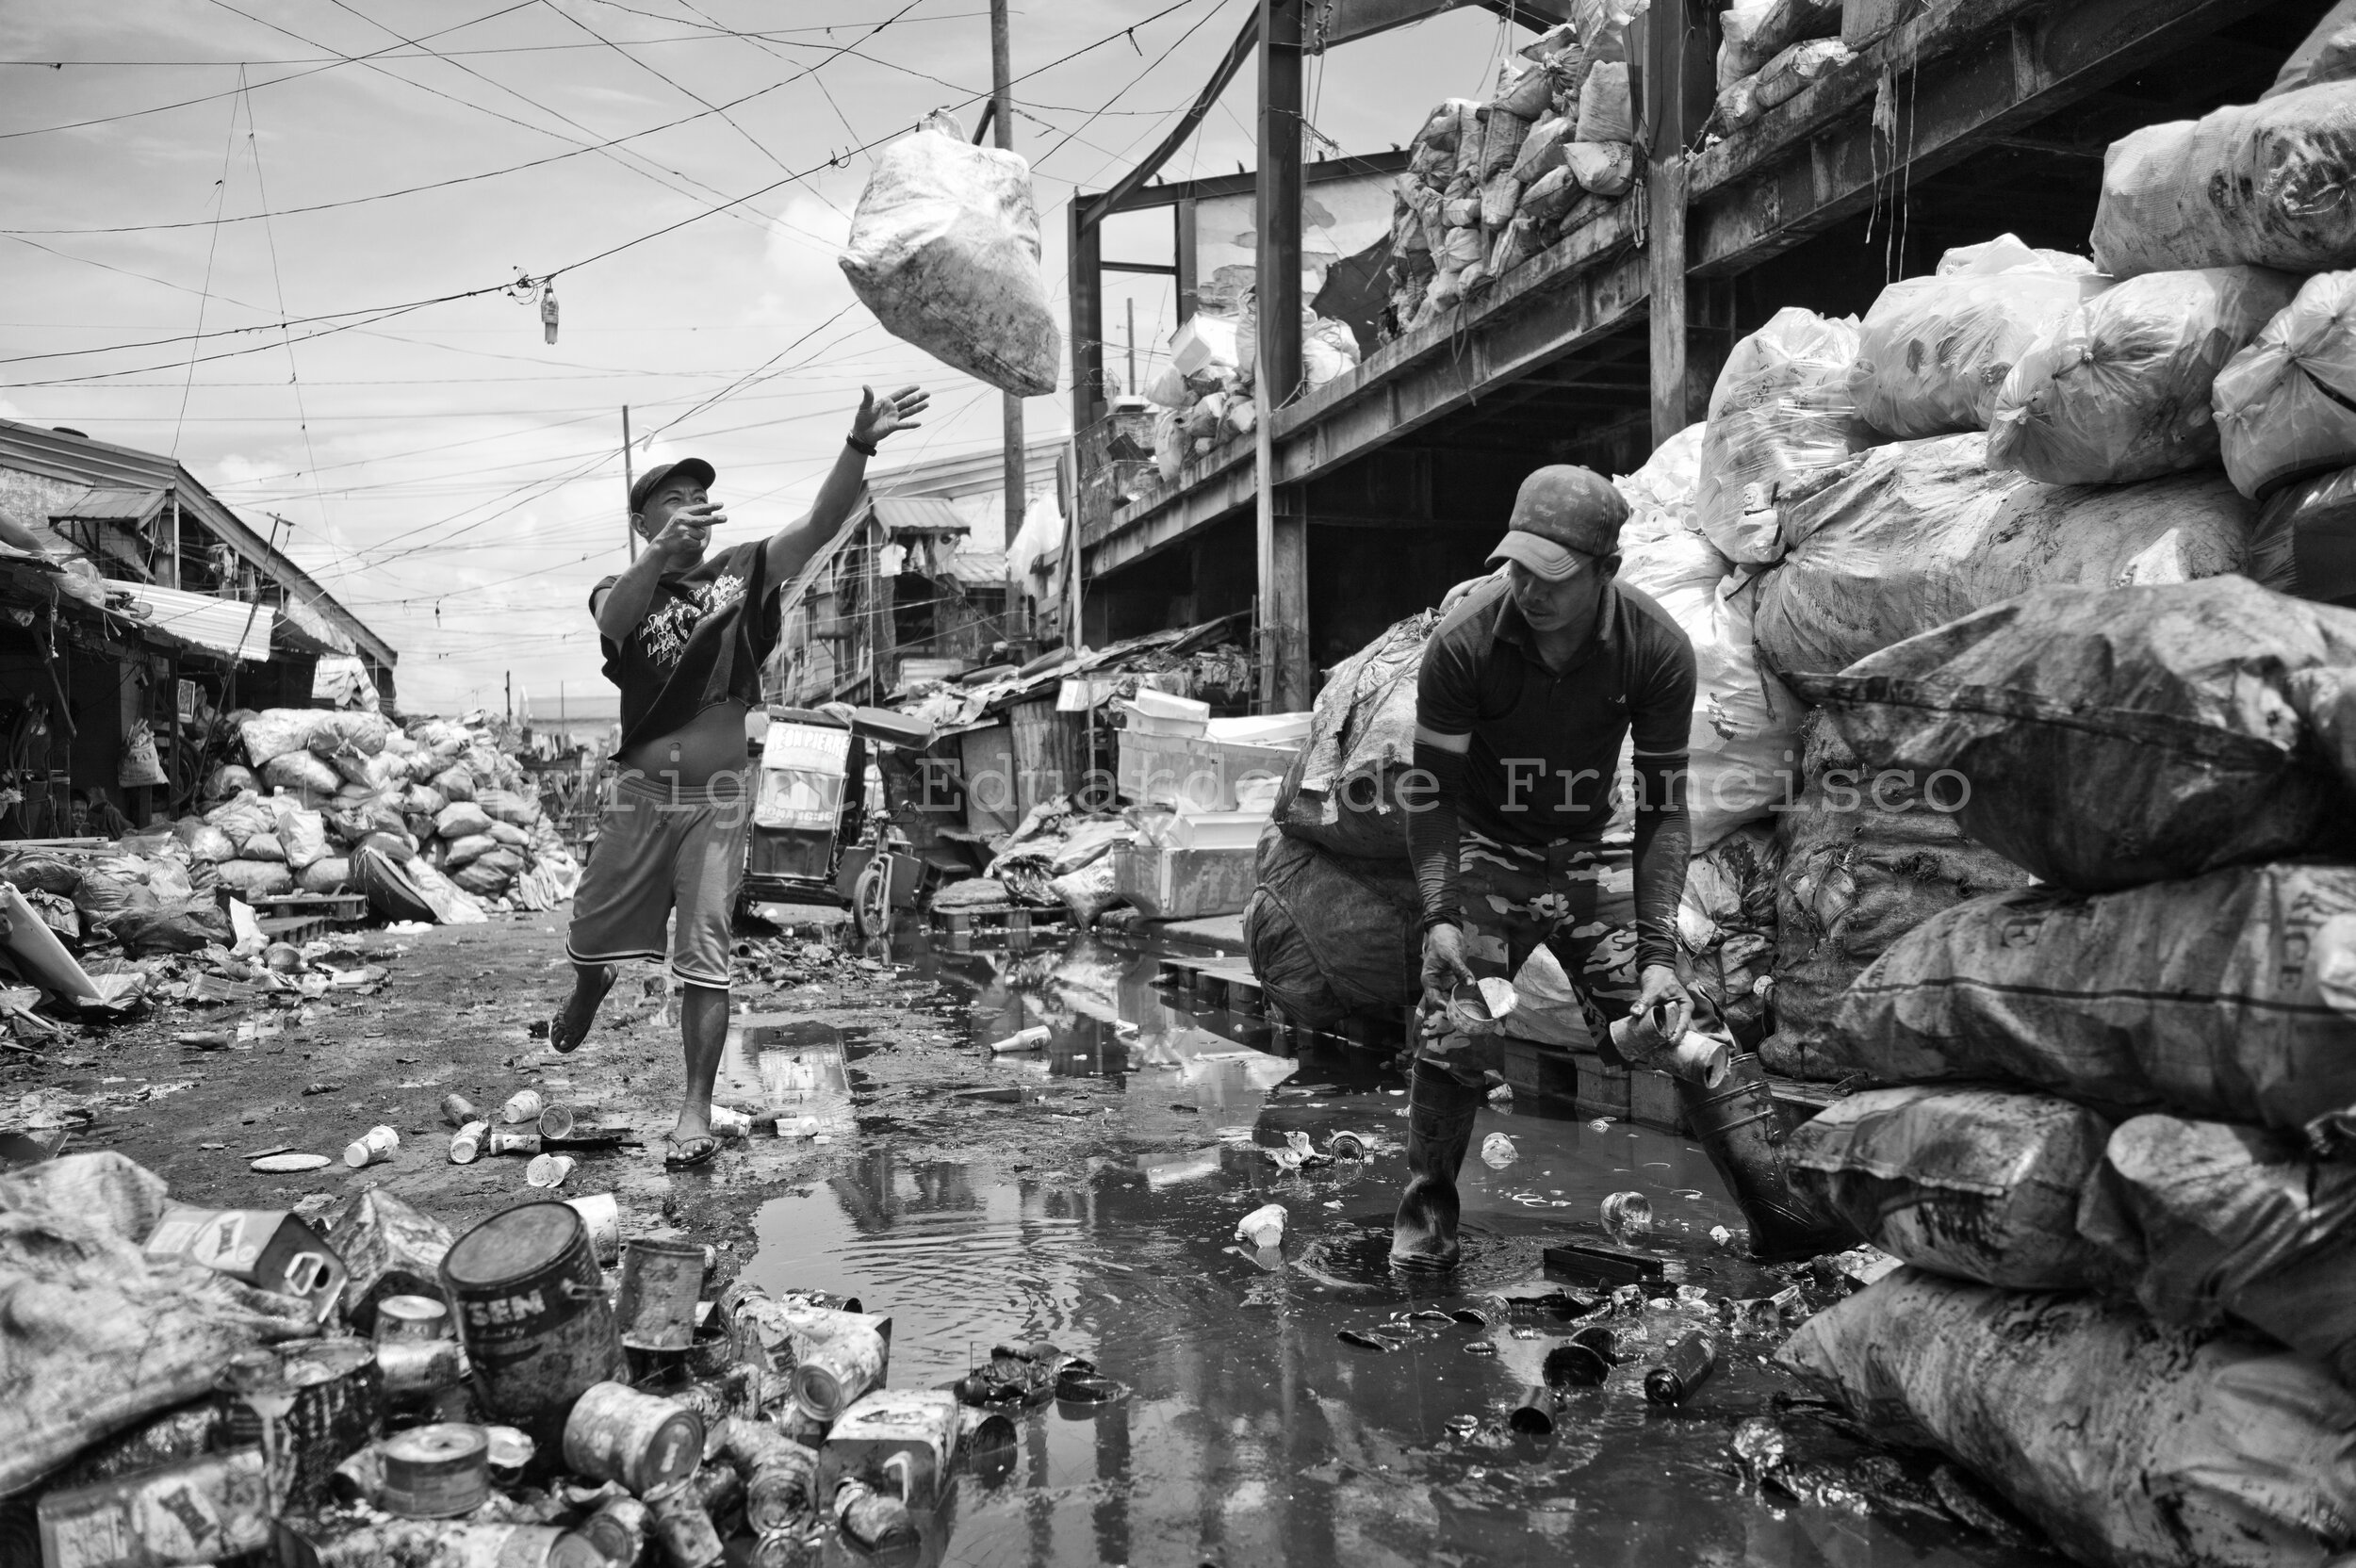  John Ocampo (right) and John De los Santos. They work together recycling rubbish in the streets of 'Aroma'. They have been in Manila since 31 and 40 years ago, respectively. 